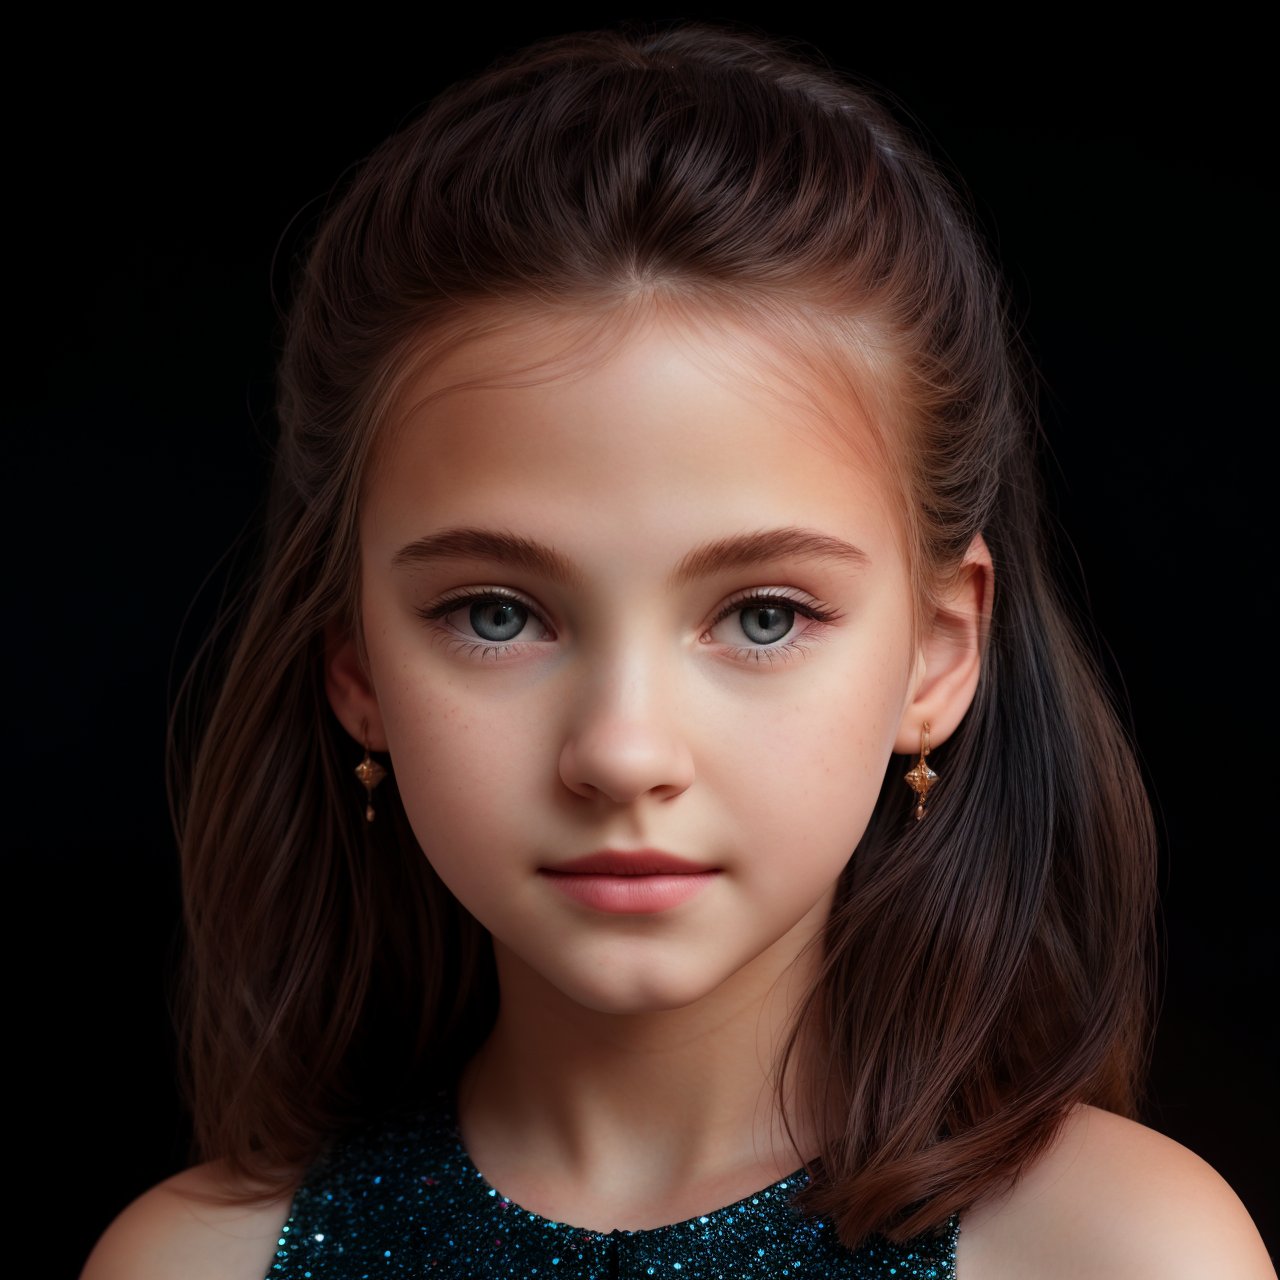 (masterpiece:1.3), close up of adorable (AIDA_LoRA_arusso:1.09) <lora:AIDA_LoRA_arusso:0.75> as little girl, pretty face, naughty, (wearing stardust dress:1.1), dramatic, insane level of details, studio photo, kkw-ph1, (colorful:1.1), (cool black background:1.3)